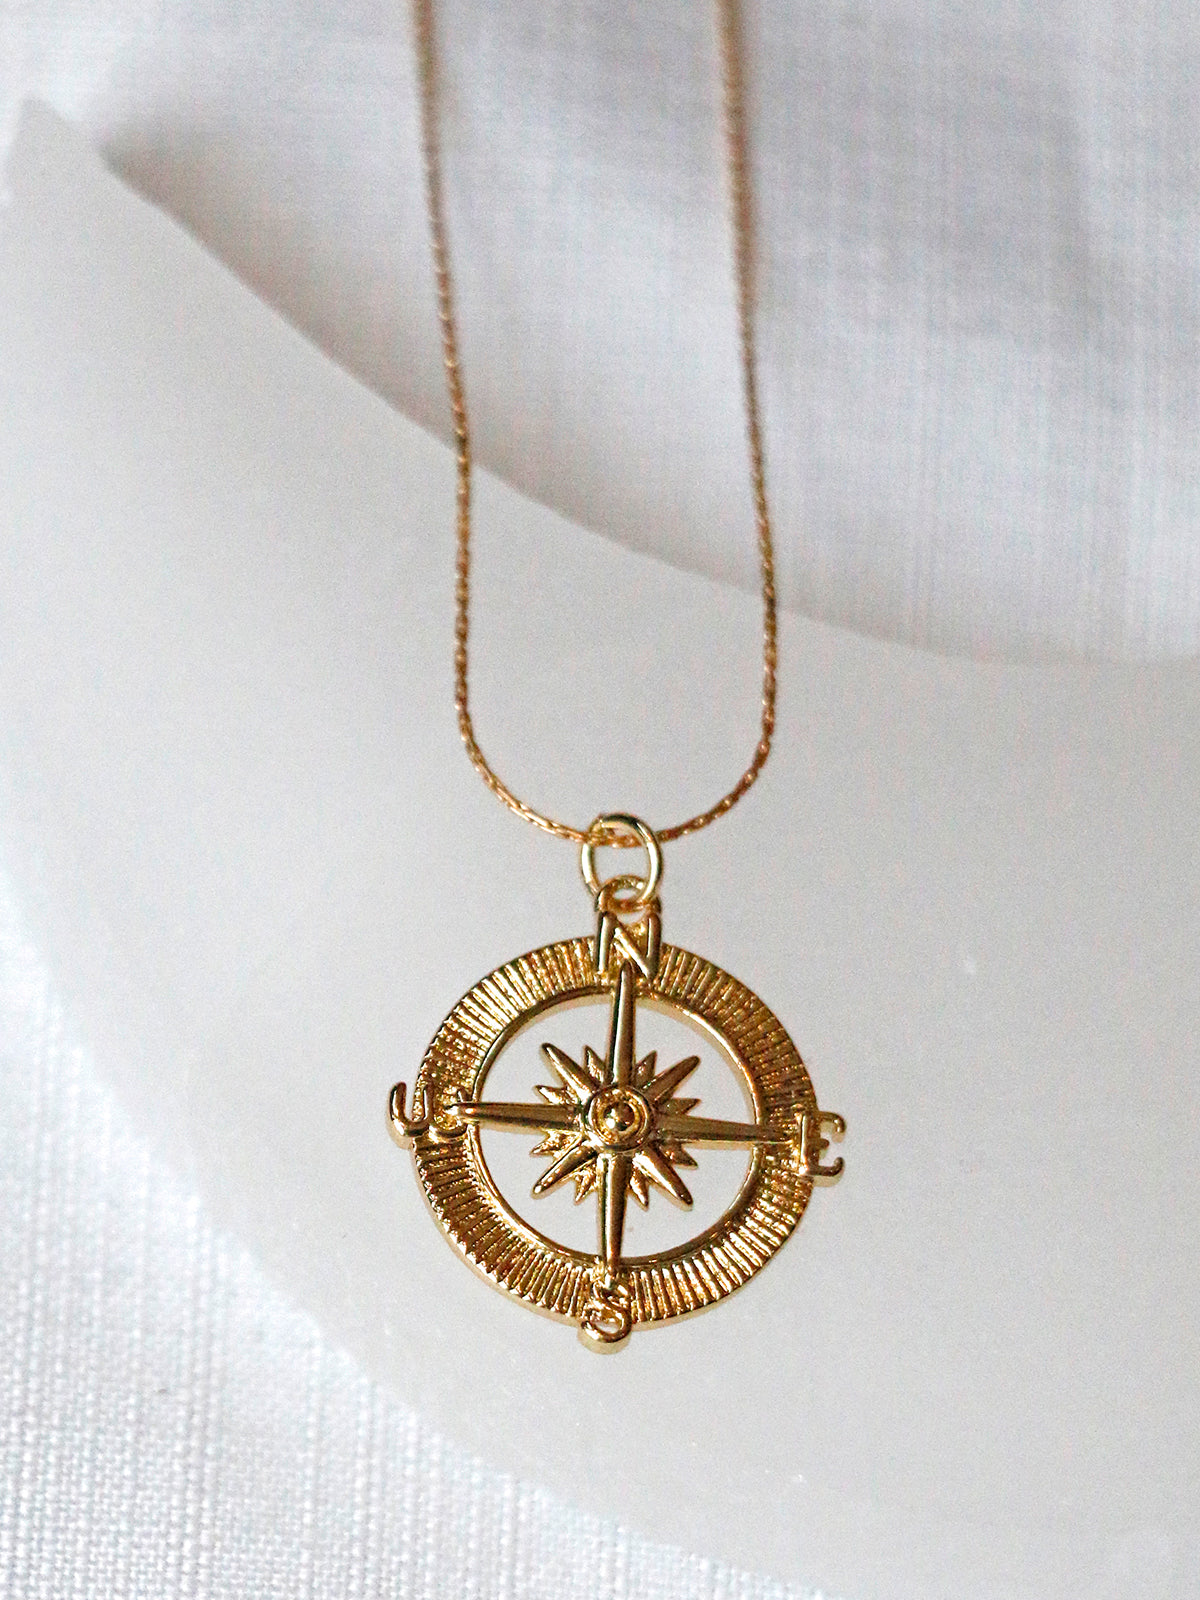 Nuance Voyager Charm Necklaces | More Styles Available!